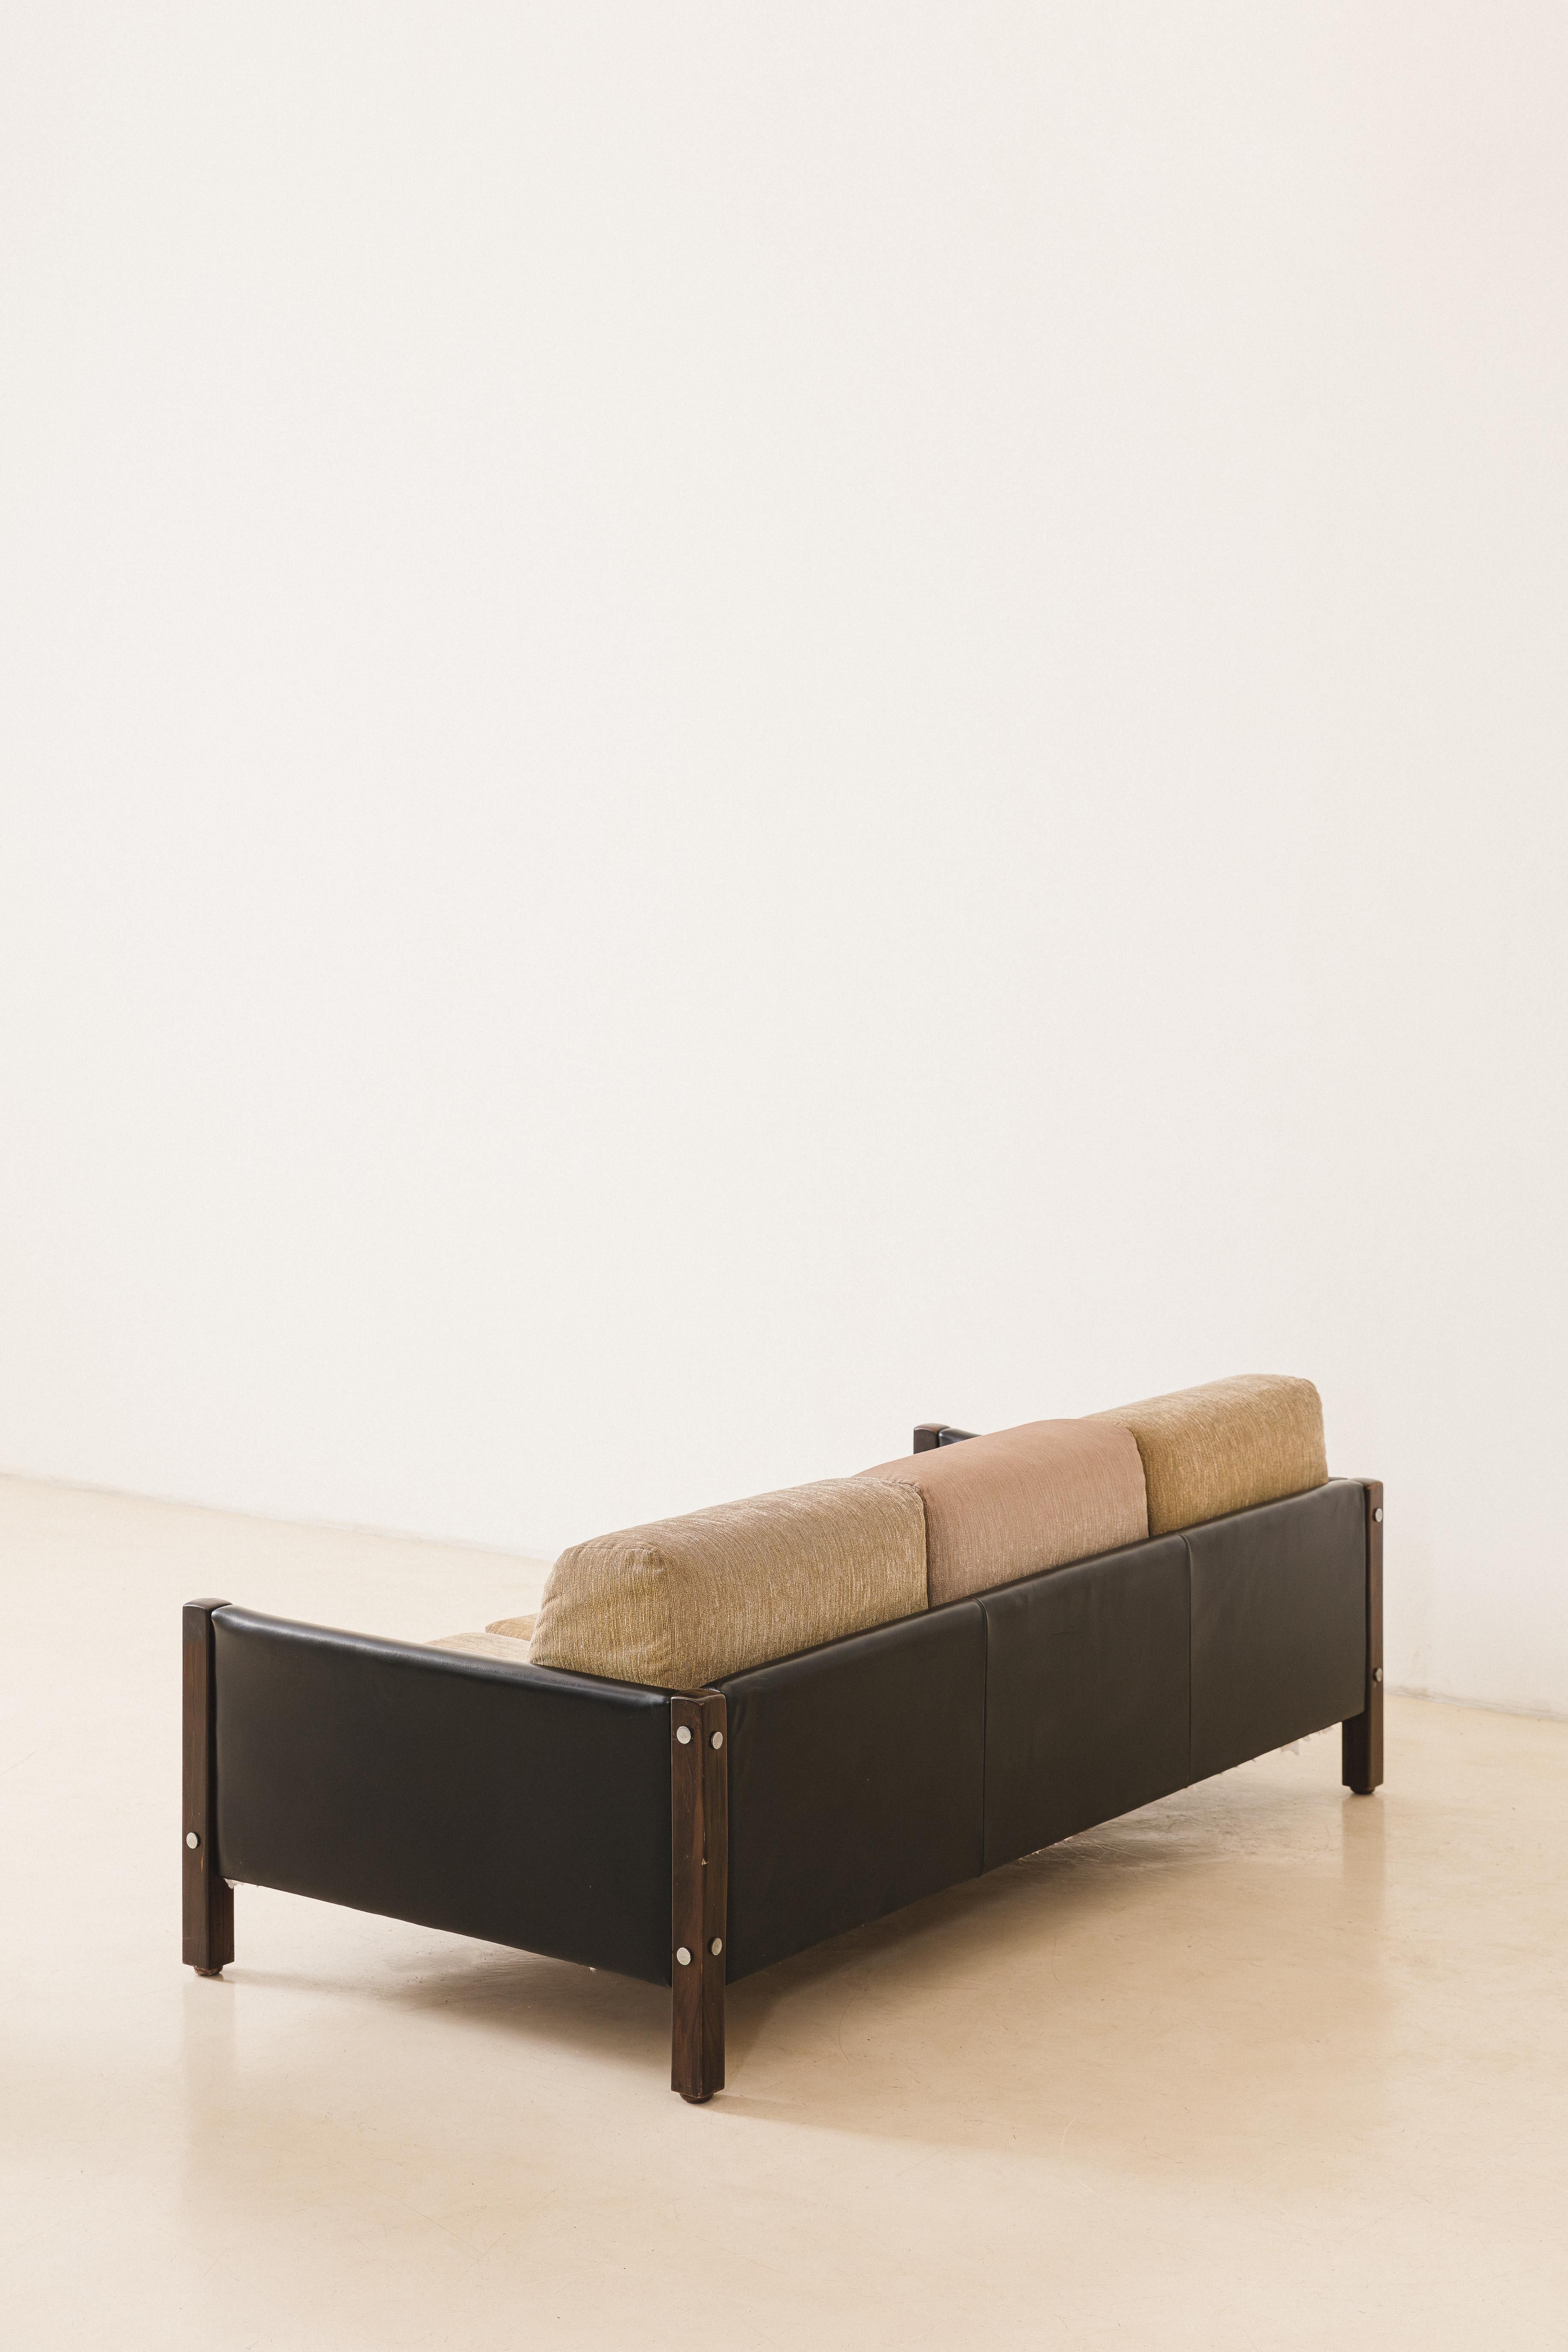 Mid-Century Modern Rosewood Three-Seat Millor Sofa, Sergio Rodrigues Modern Design, Brazil, 1960s For Sale